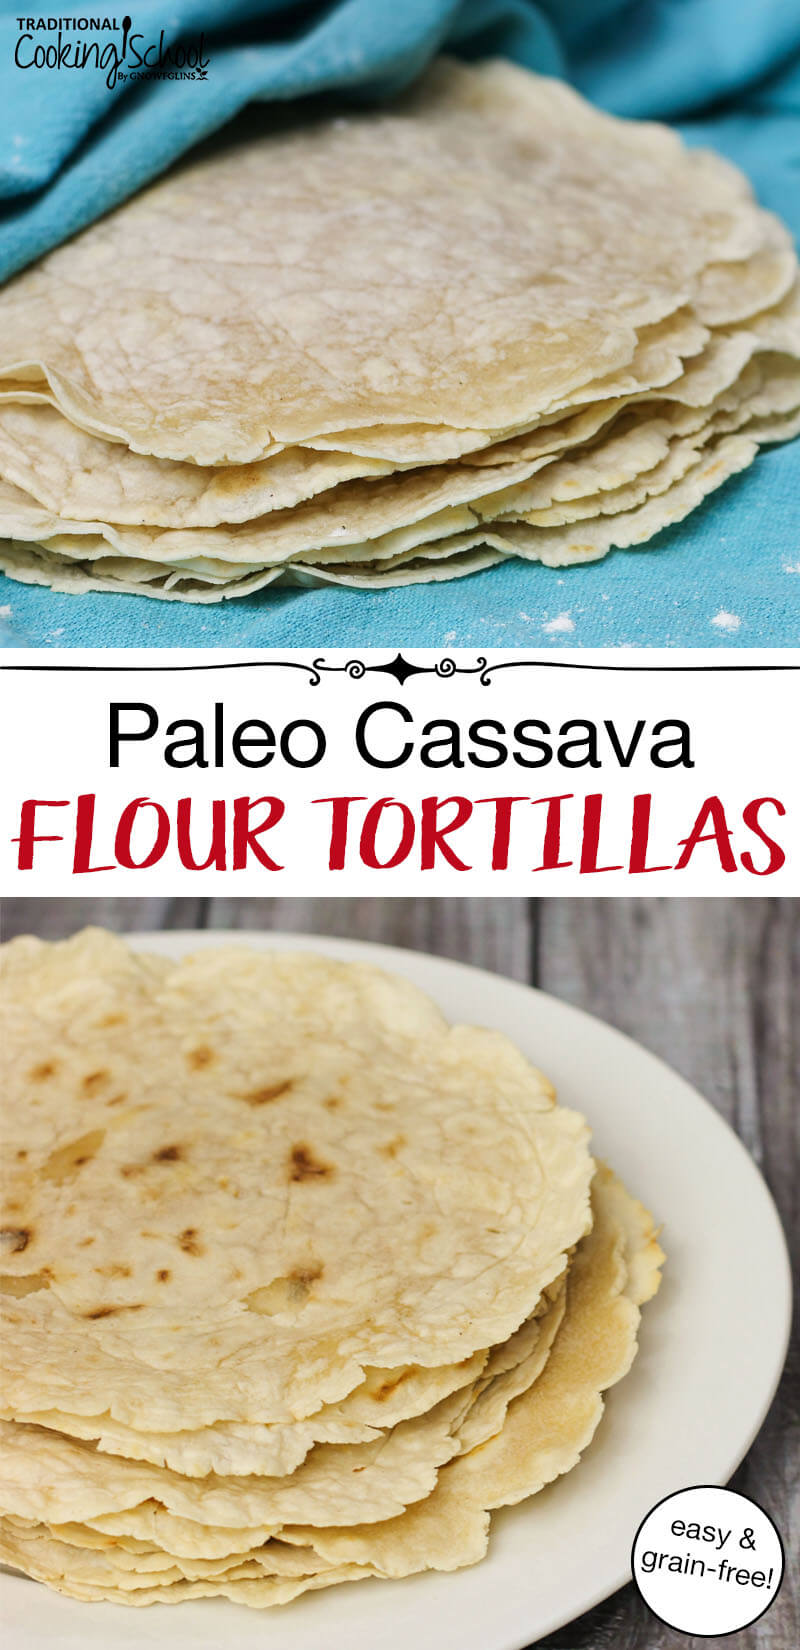 photo collage of homemade grain-free tortillas wrapped in a blue cloth and on a plate with text overlay: "Paleo Cassava Flour Tortillas"